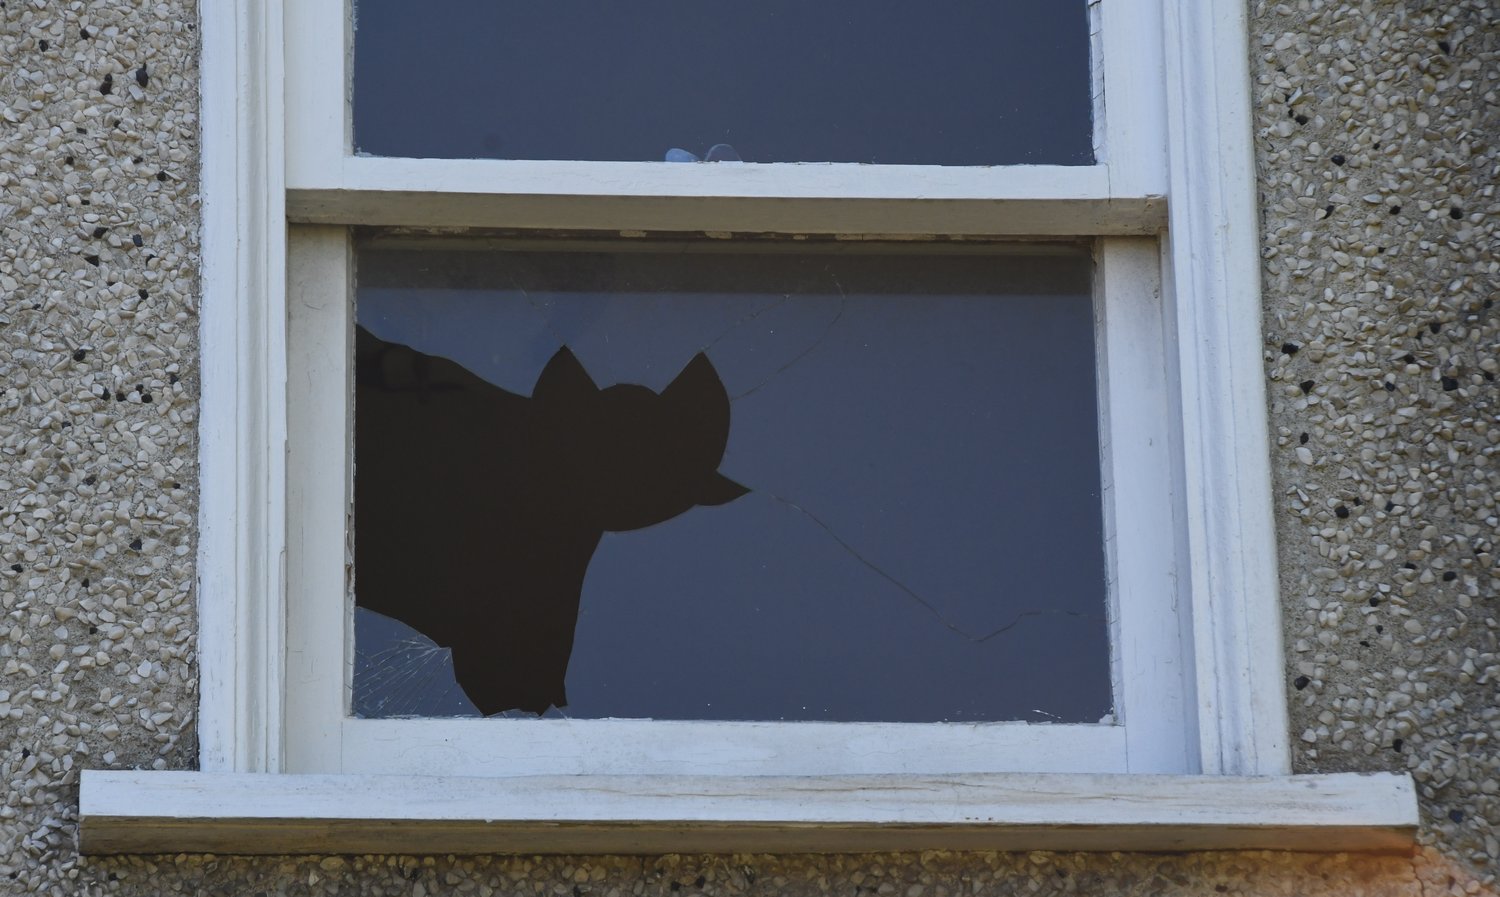 A broken window on the back side of the Cherry Street Building oddly bears the appearance of a cat peering outside.